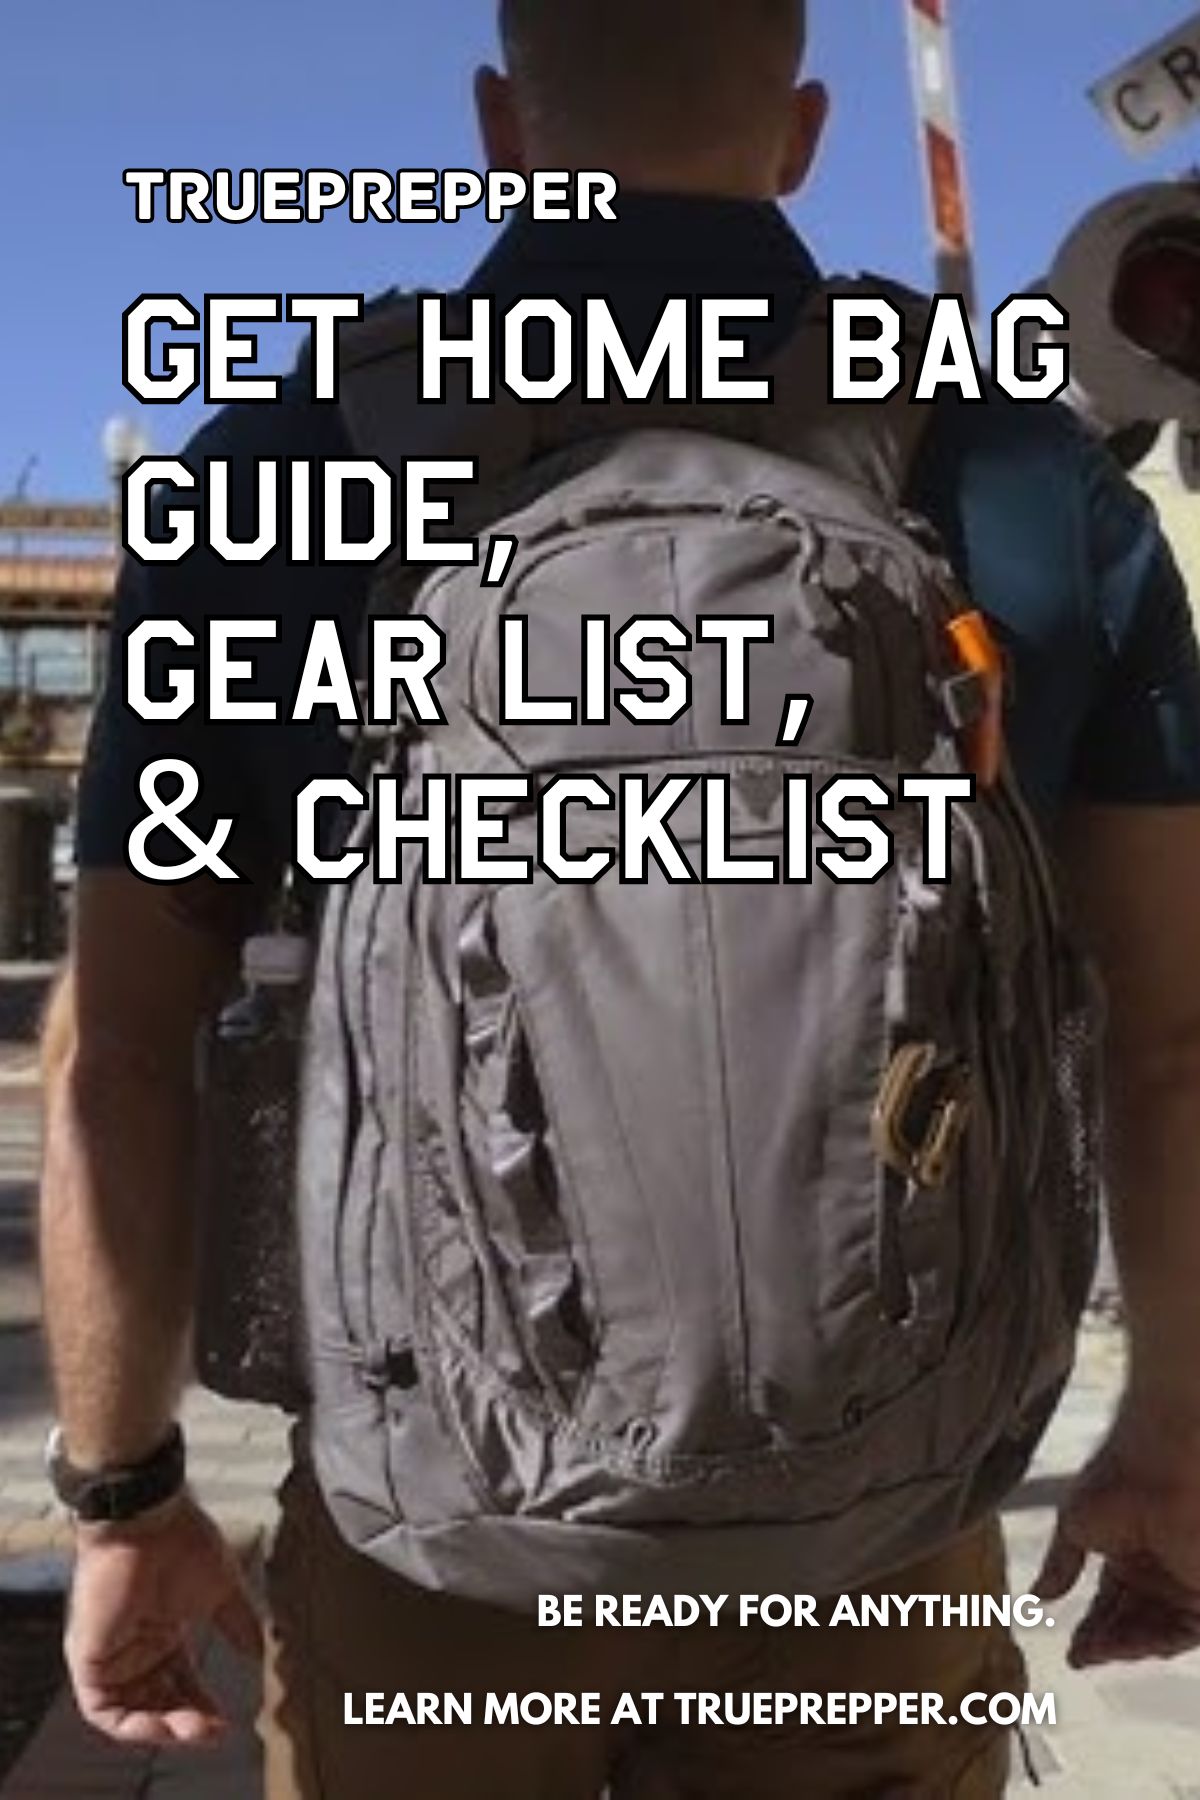 The Get Home Bag — What To Include? - The Mag Life